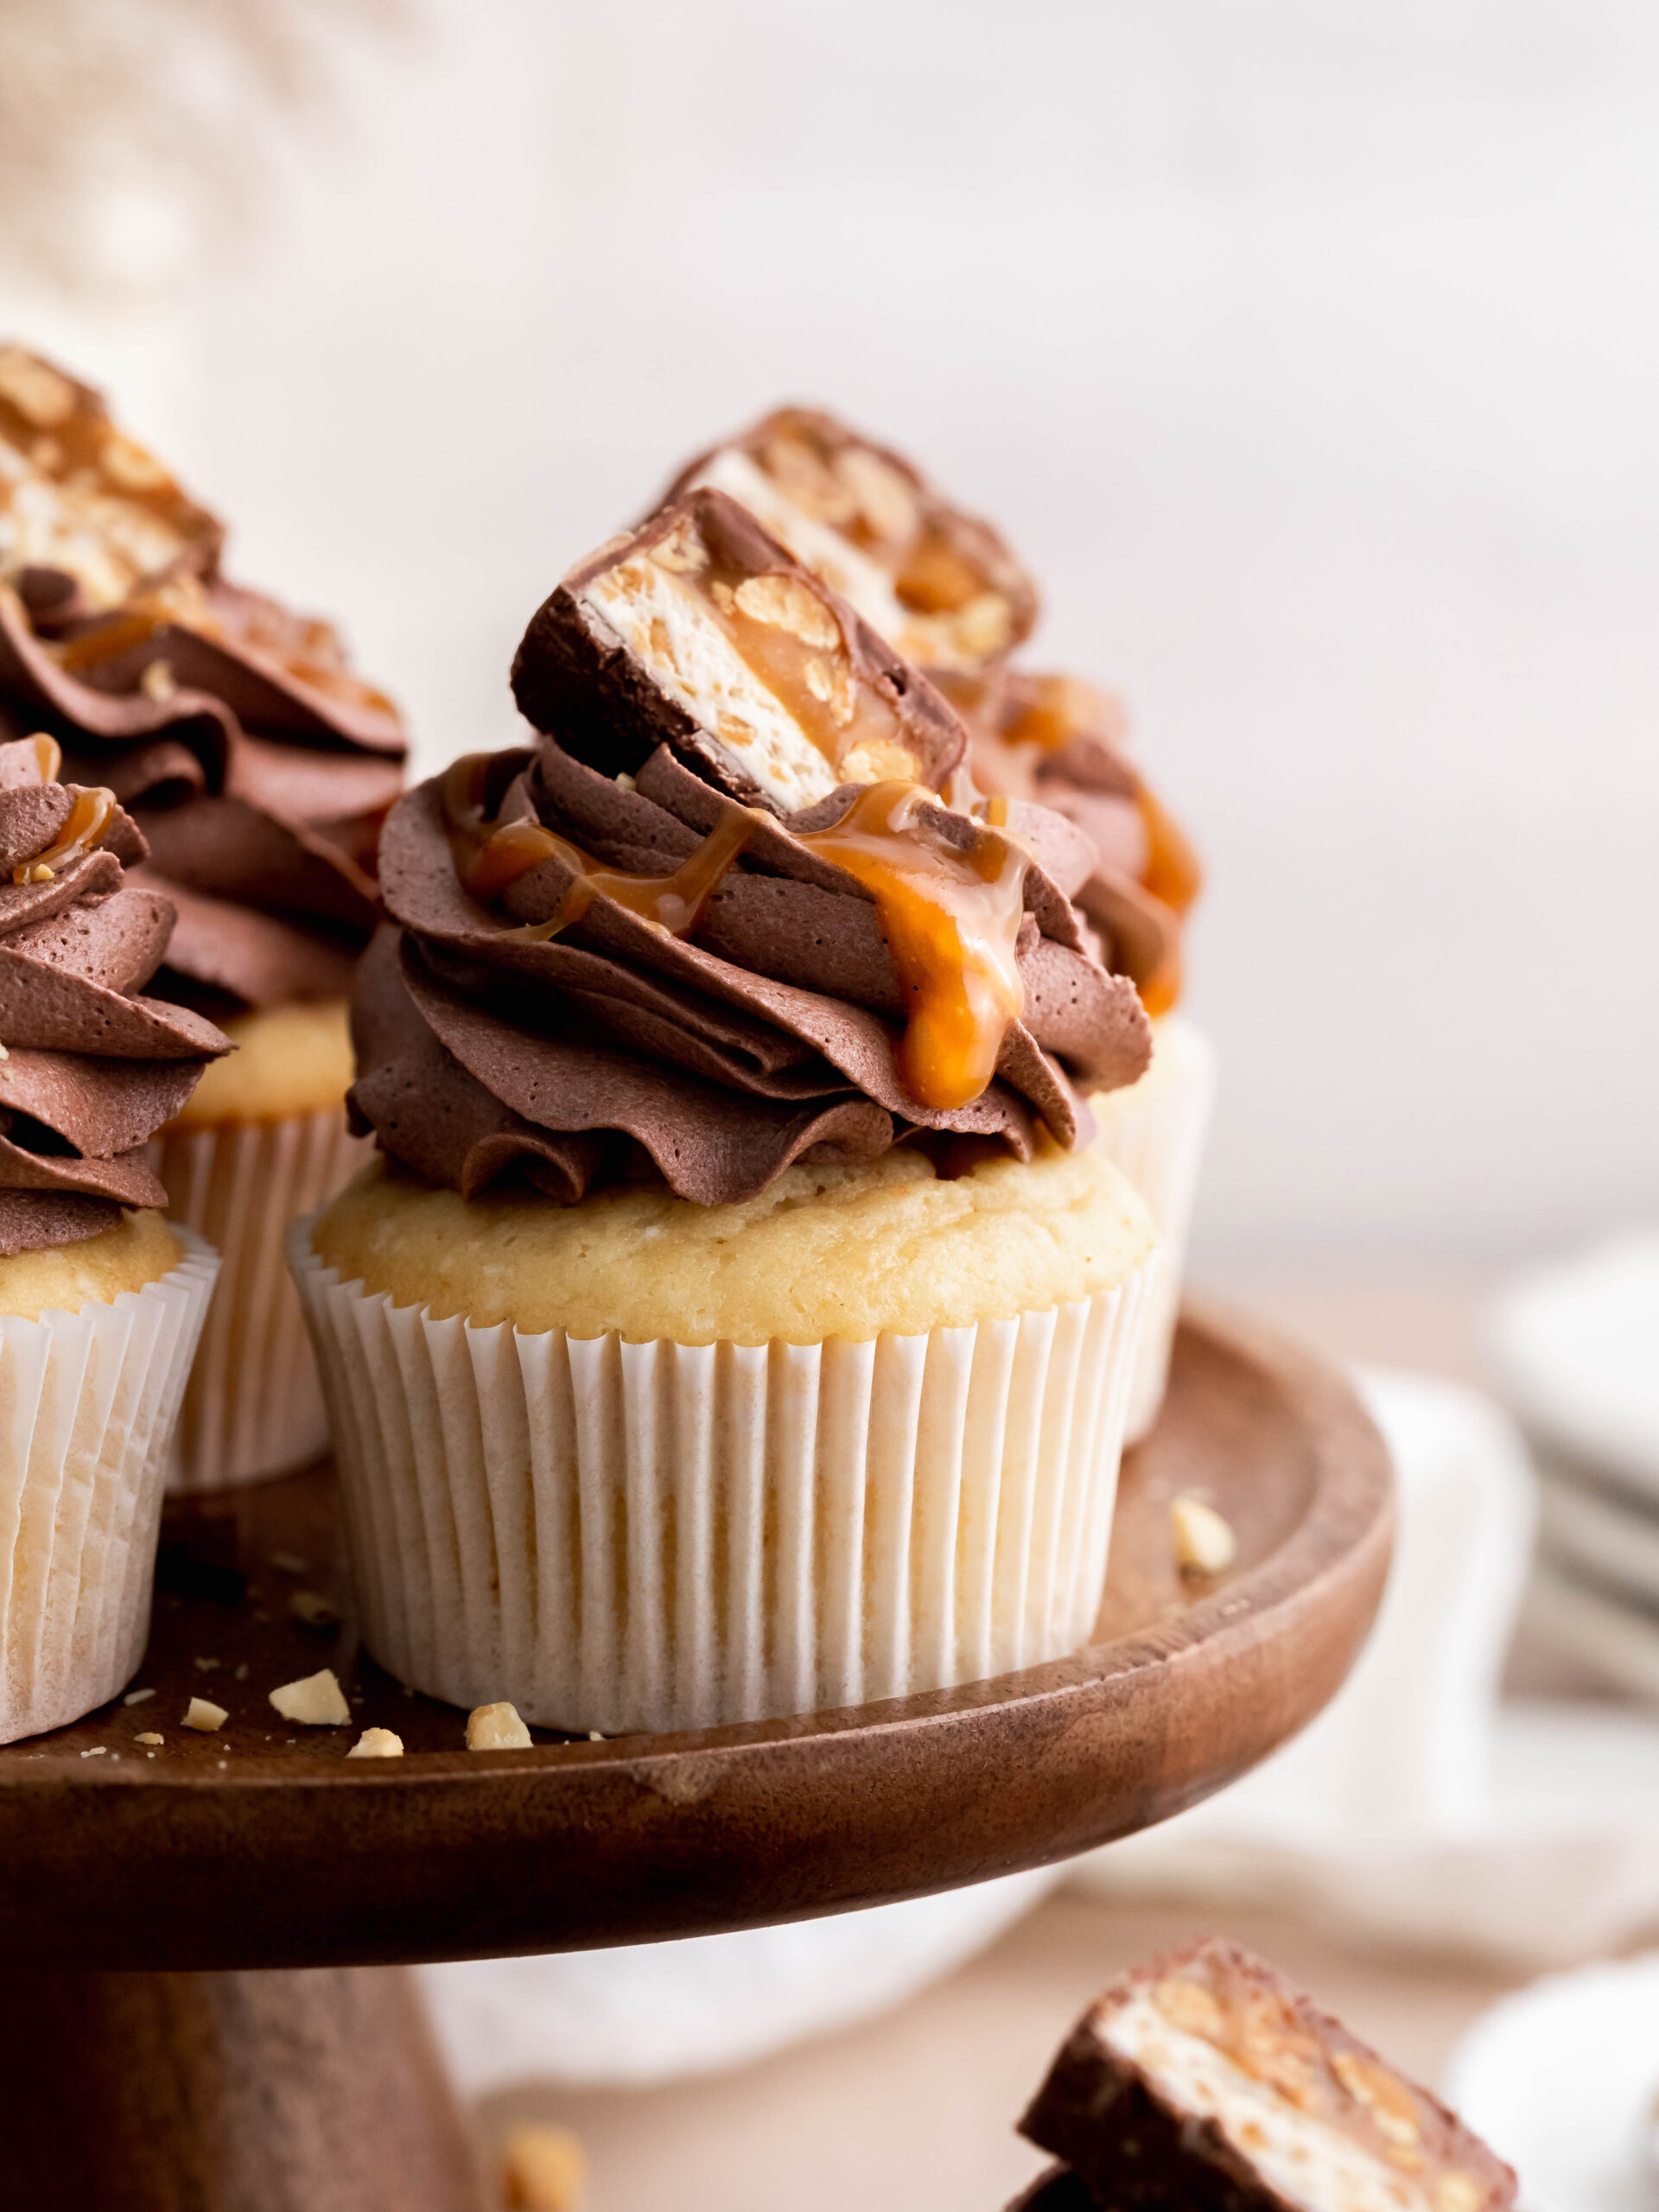 Snickers cupcakes on cake stand.